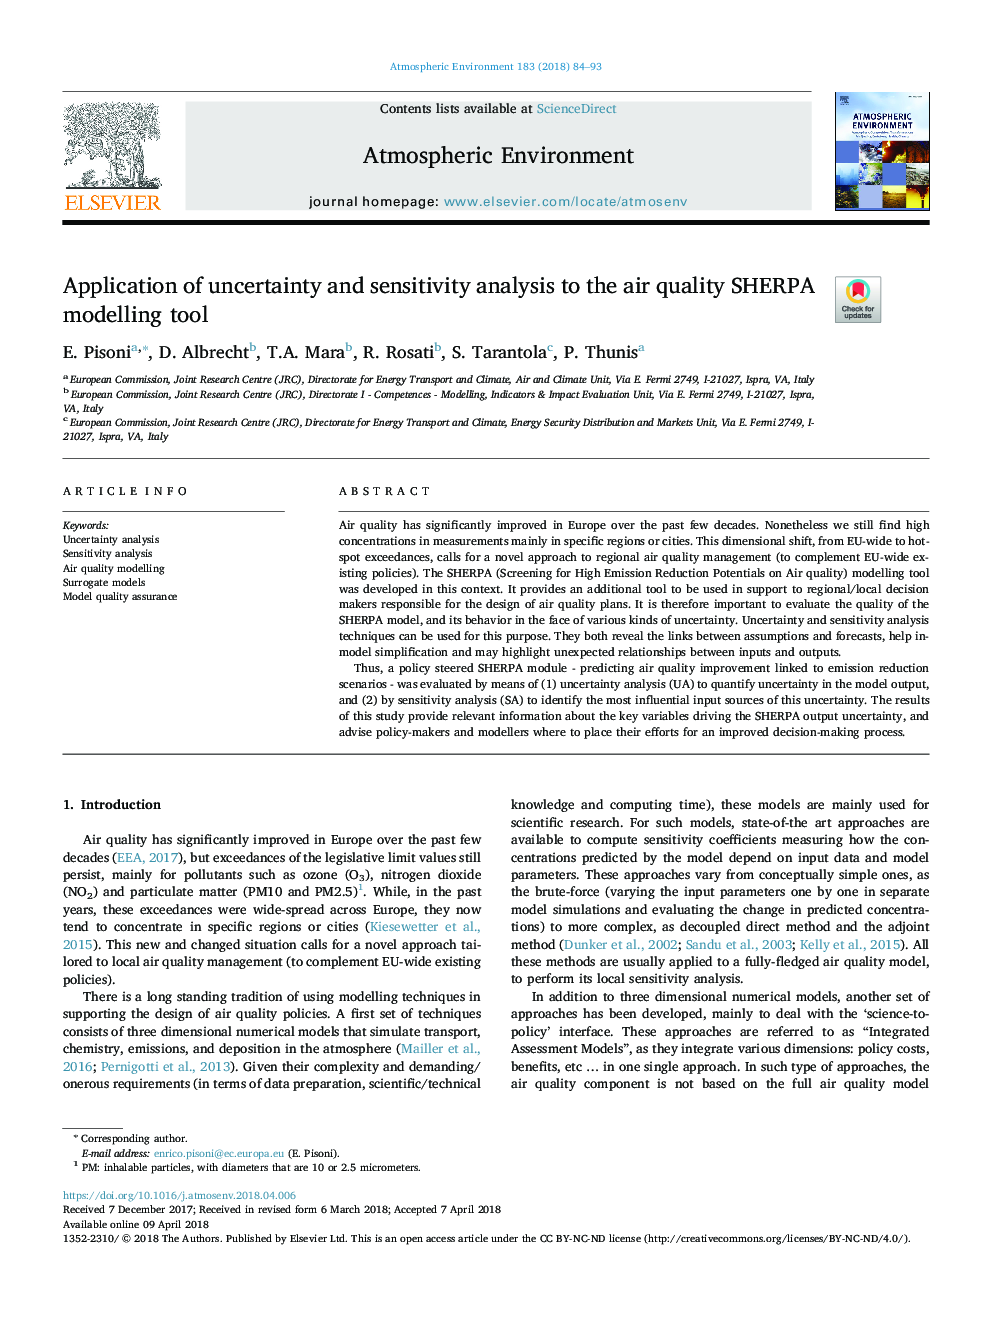 Application of uncertainty and sensitivity analysis to the air quality SHERPA modelling tool